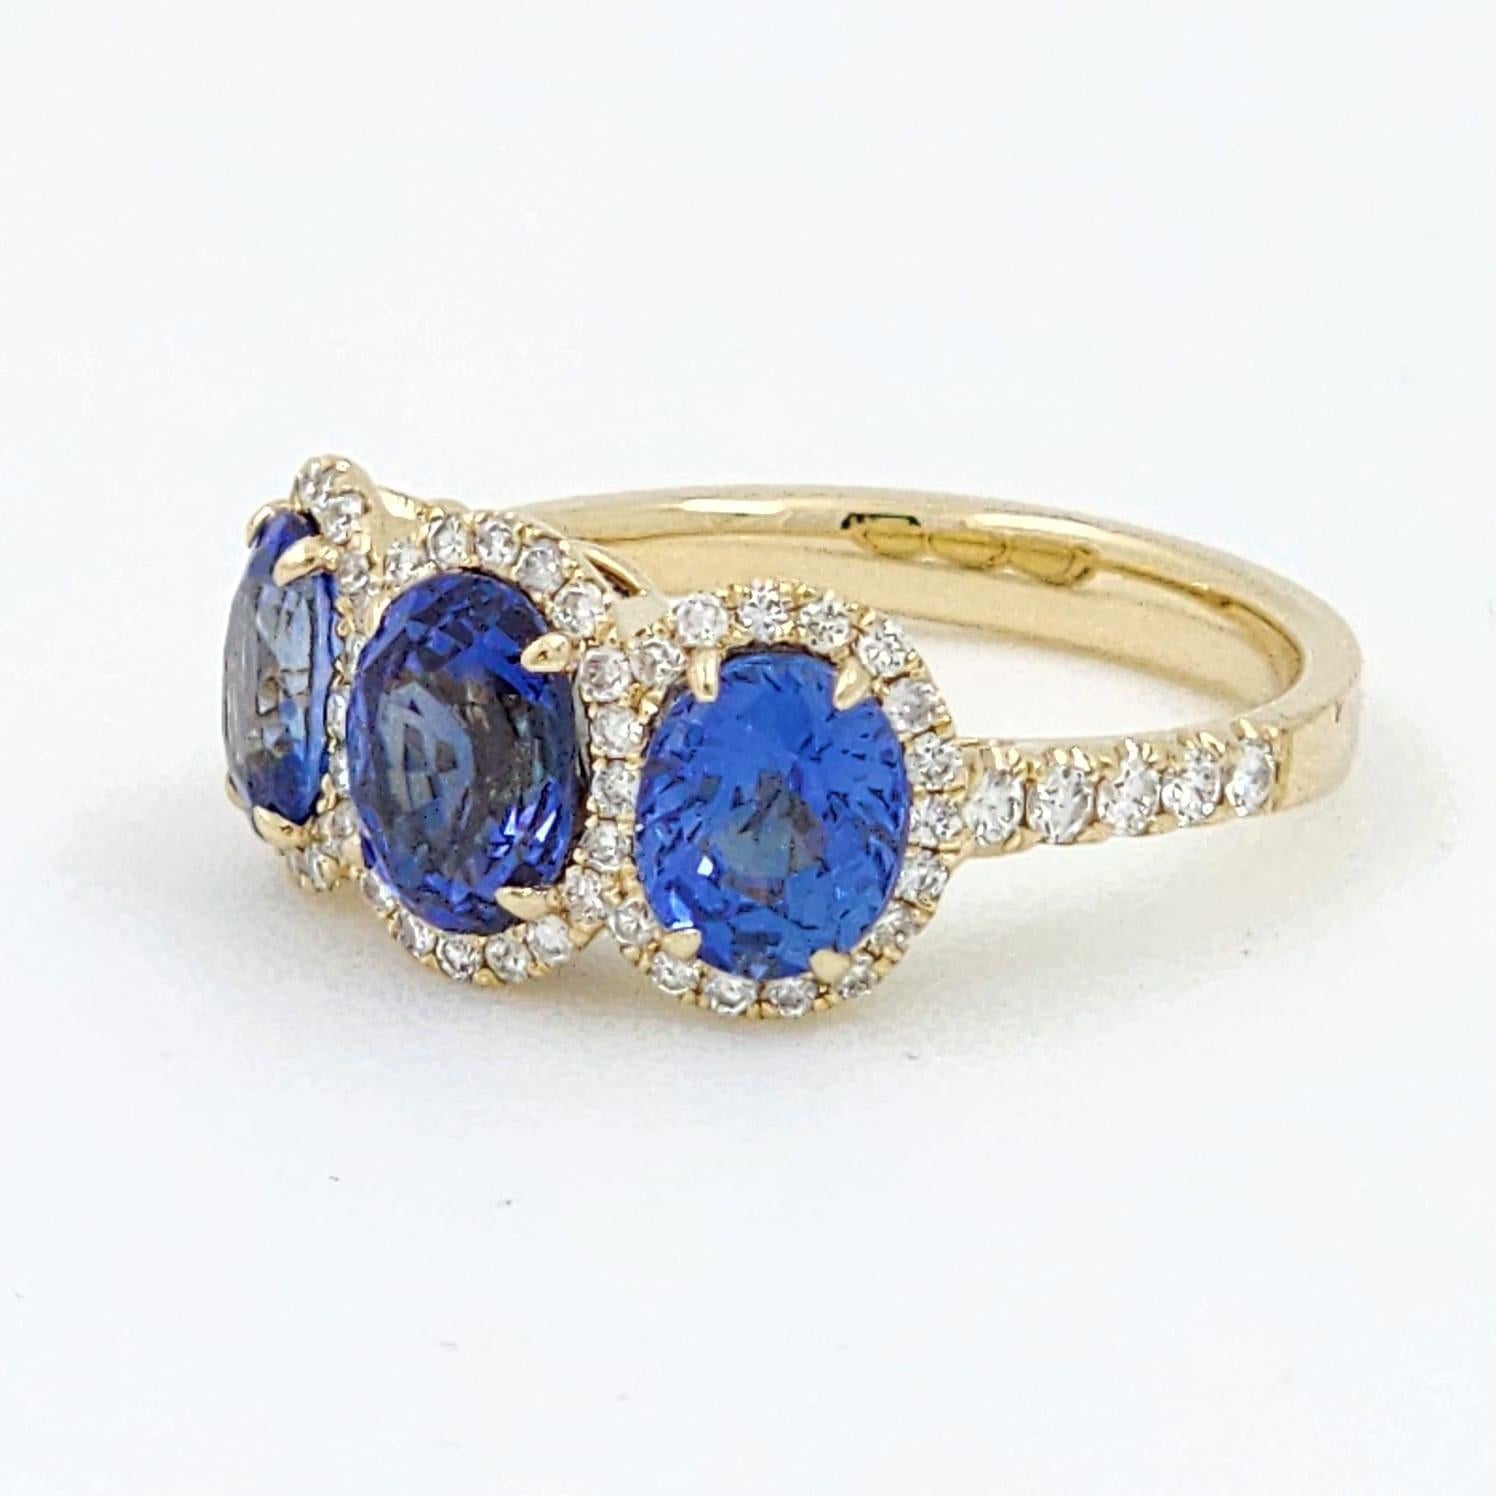 Contemporary 3.81 Carat Blue Sapphire and Diamond Ring in 14 Karat Yellow Gold For Sale